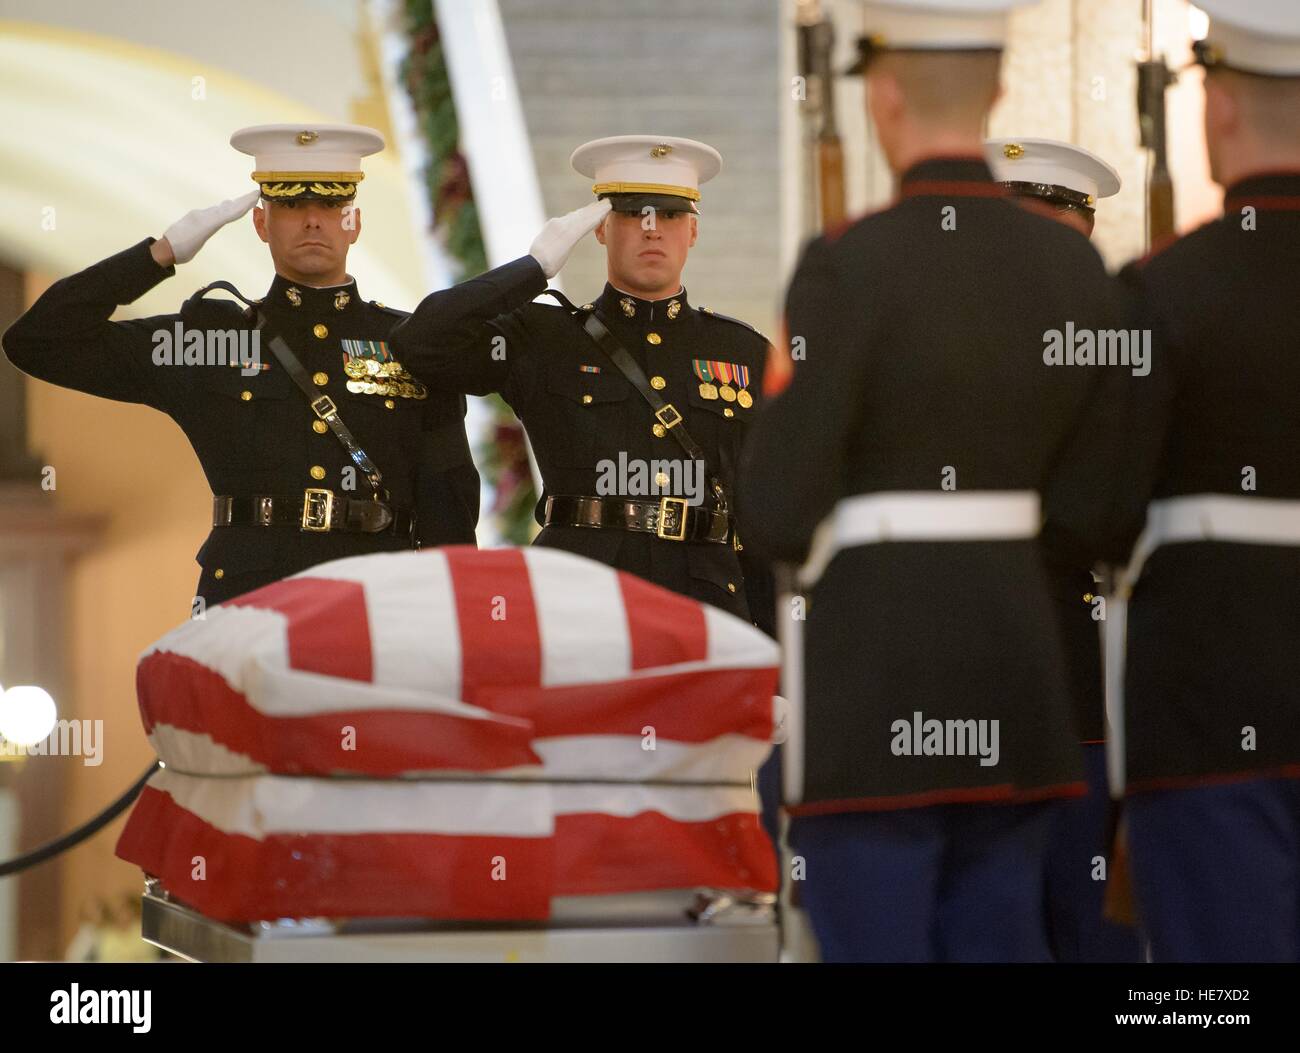 U.S. Marines stand guard by the casket of astronaut and former Senator John Glenn in repose at the Ohio Statehouse December 16, 2016 in Columbus, Ohio. The former Marine pilot, Senator and first man to orbit the earth died last week at the age of 95. Stock Photo